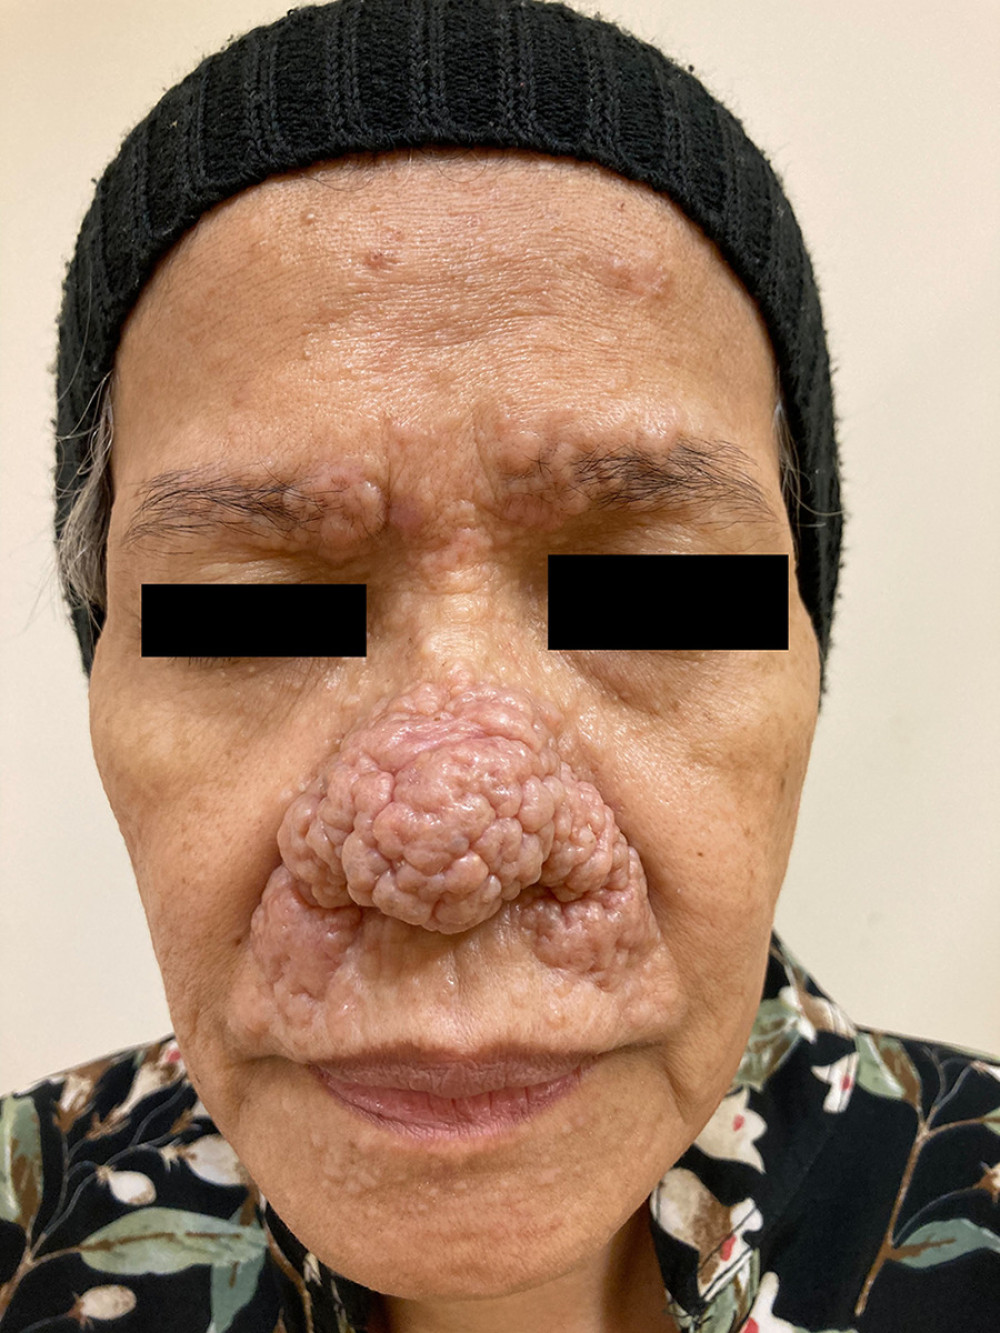 Multiple rounded whitish and skin-colored papules and nodules symmetrically distributed on the nasal and perinasal areas, eyebrows, and forehead.